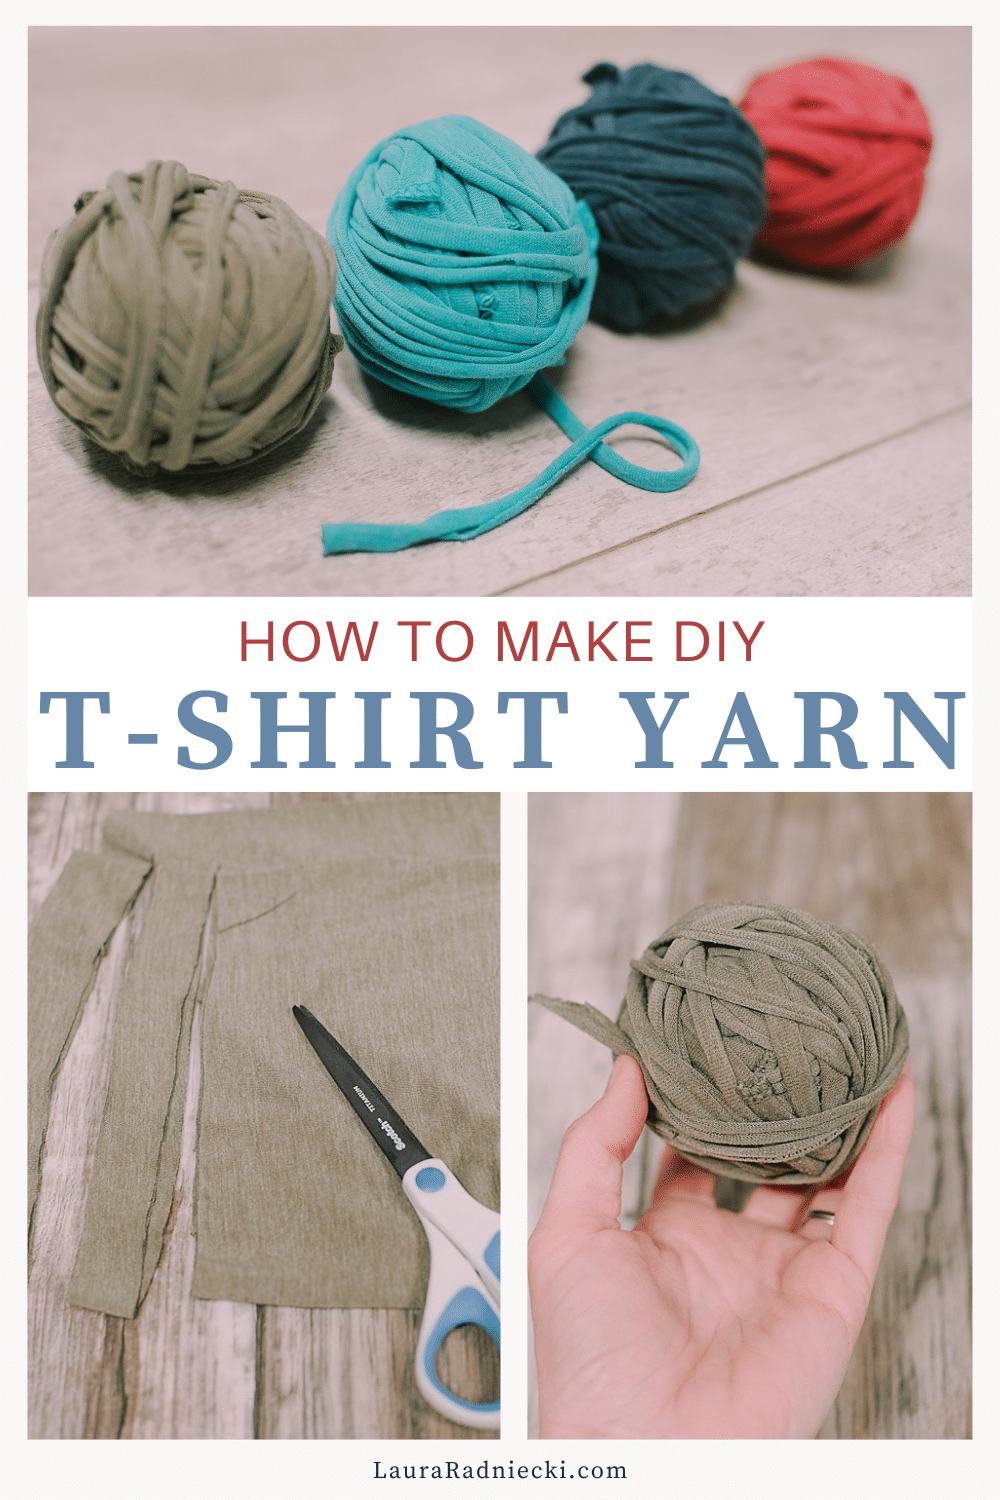 How to make DIY T-shirt yarn out of old worn-out shirts. Recycled t-shirts are upcycled into T-Shirt Yarn to use for new craft projects.